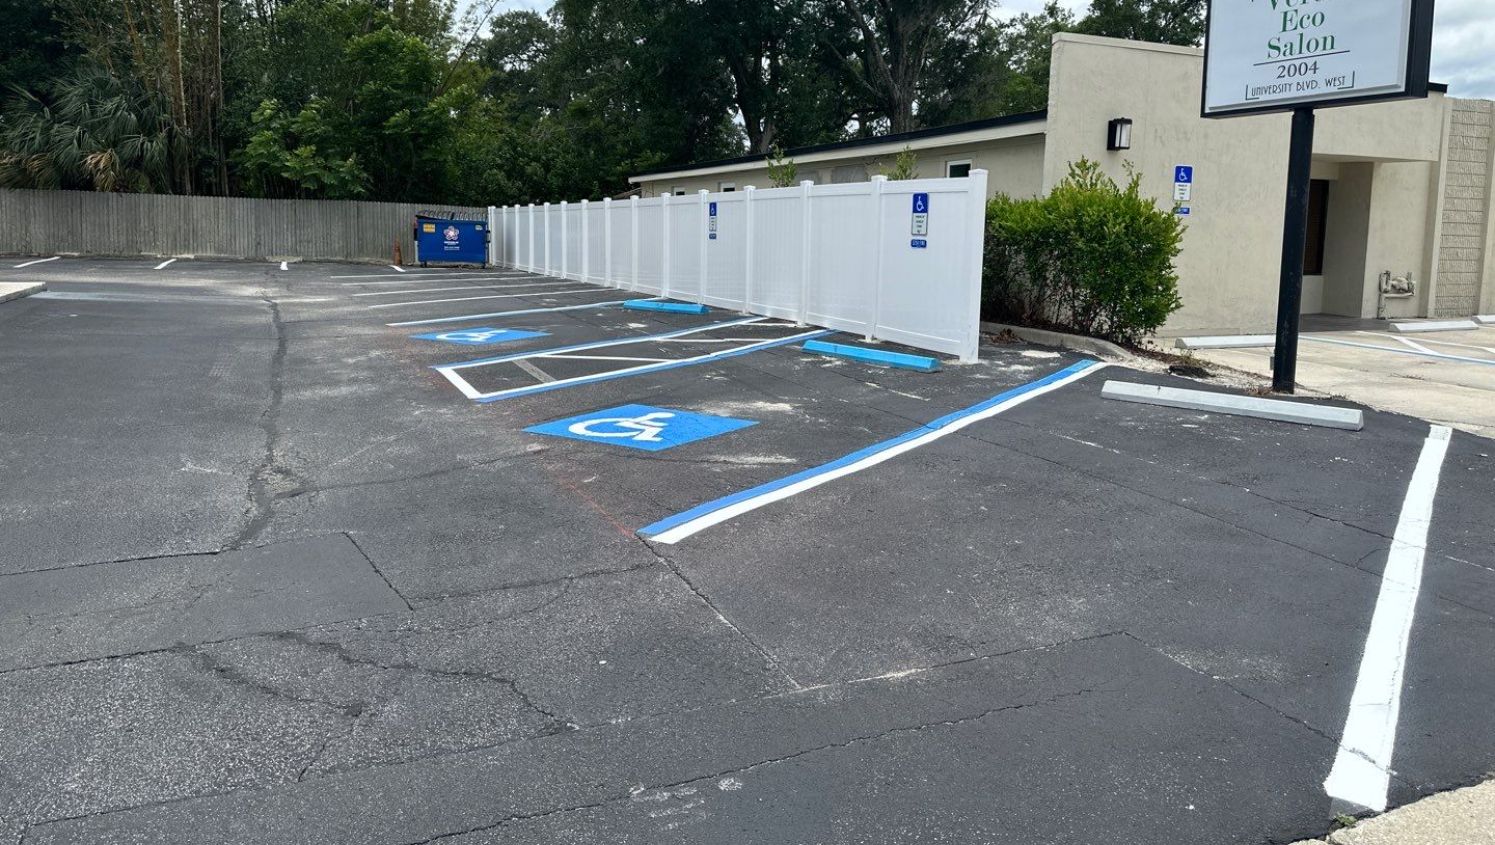 ADA-accessible parking spaces